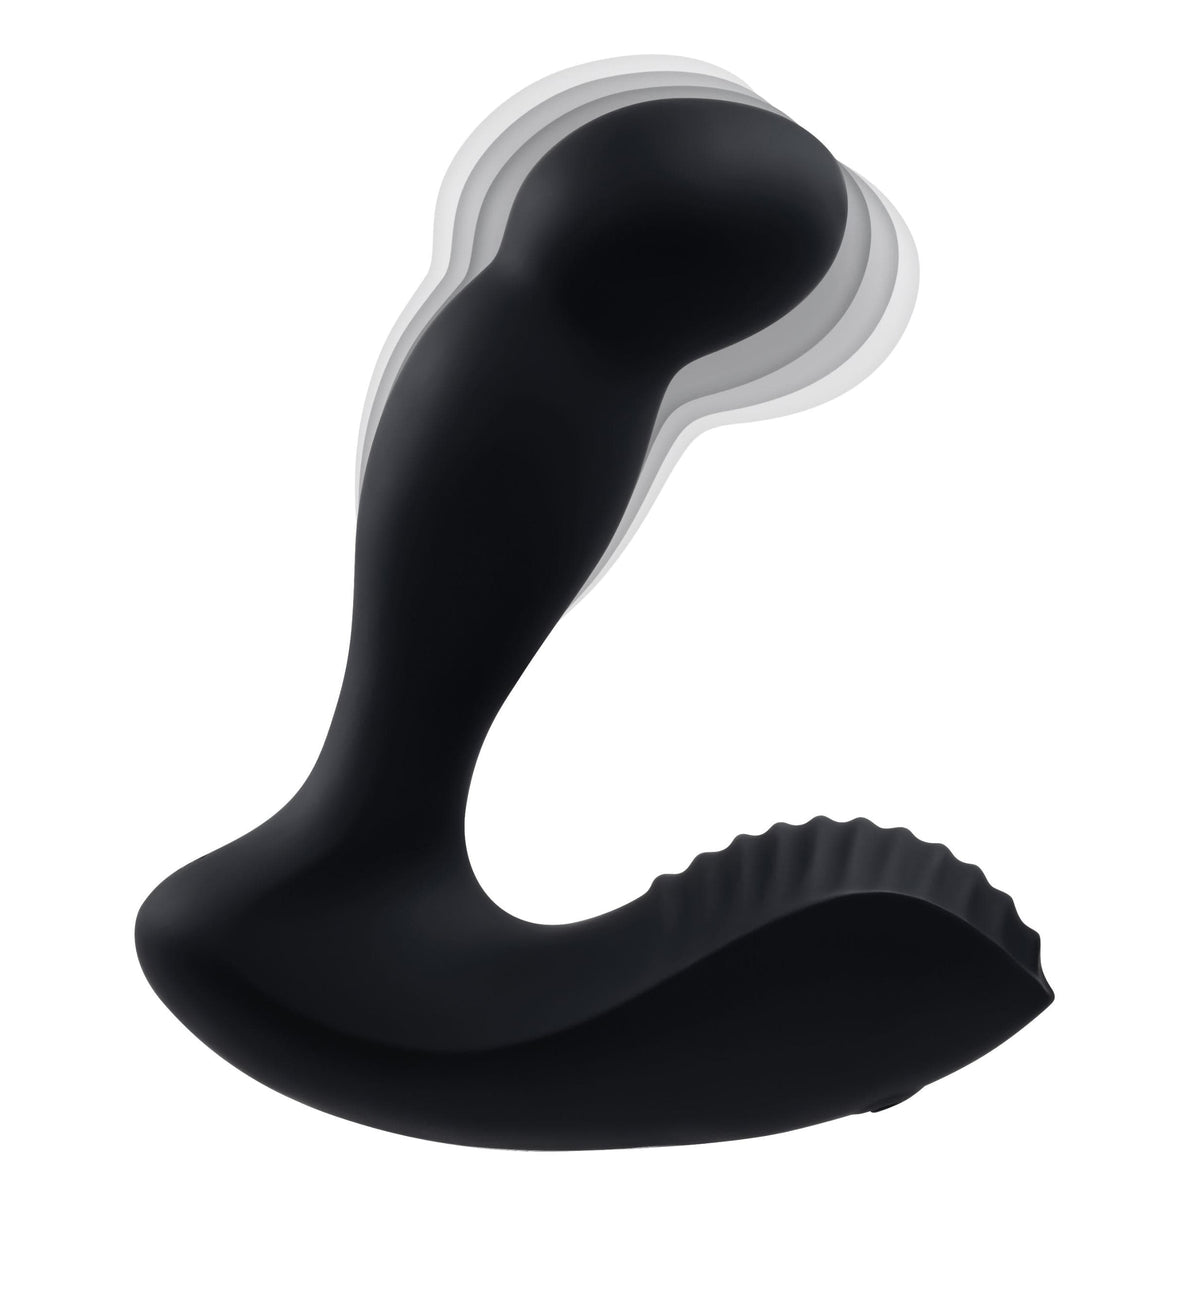 adams come hither prostate massager black